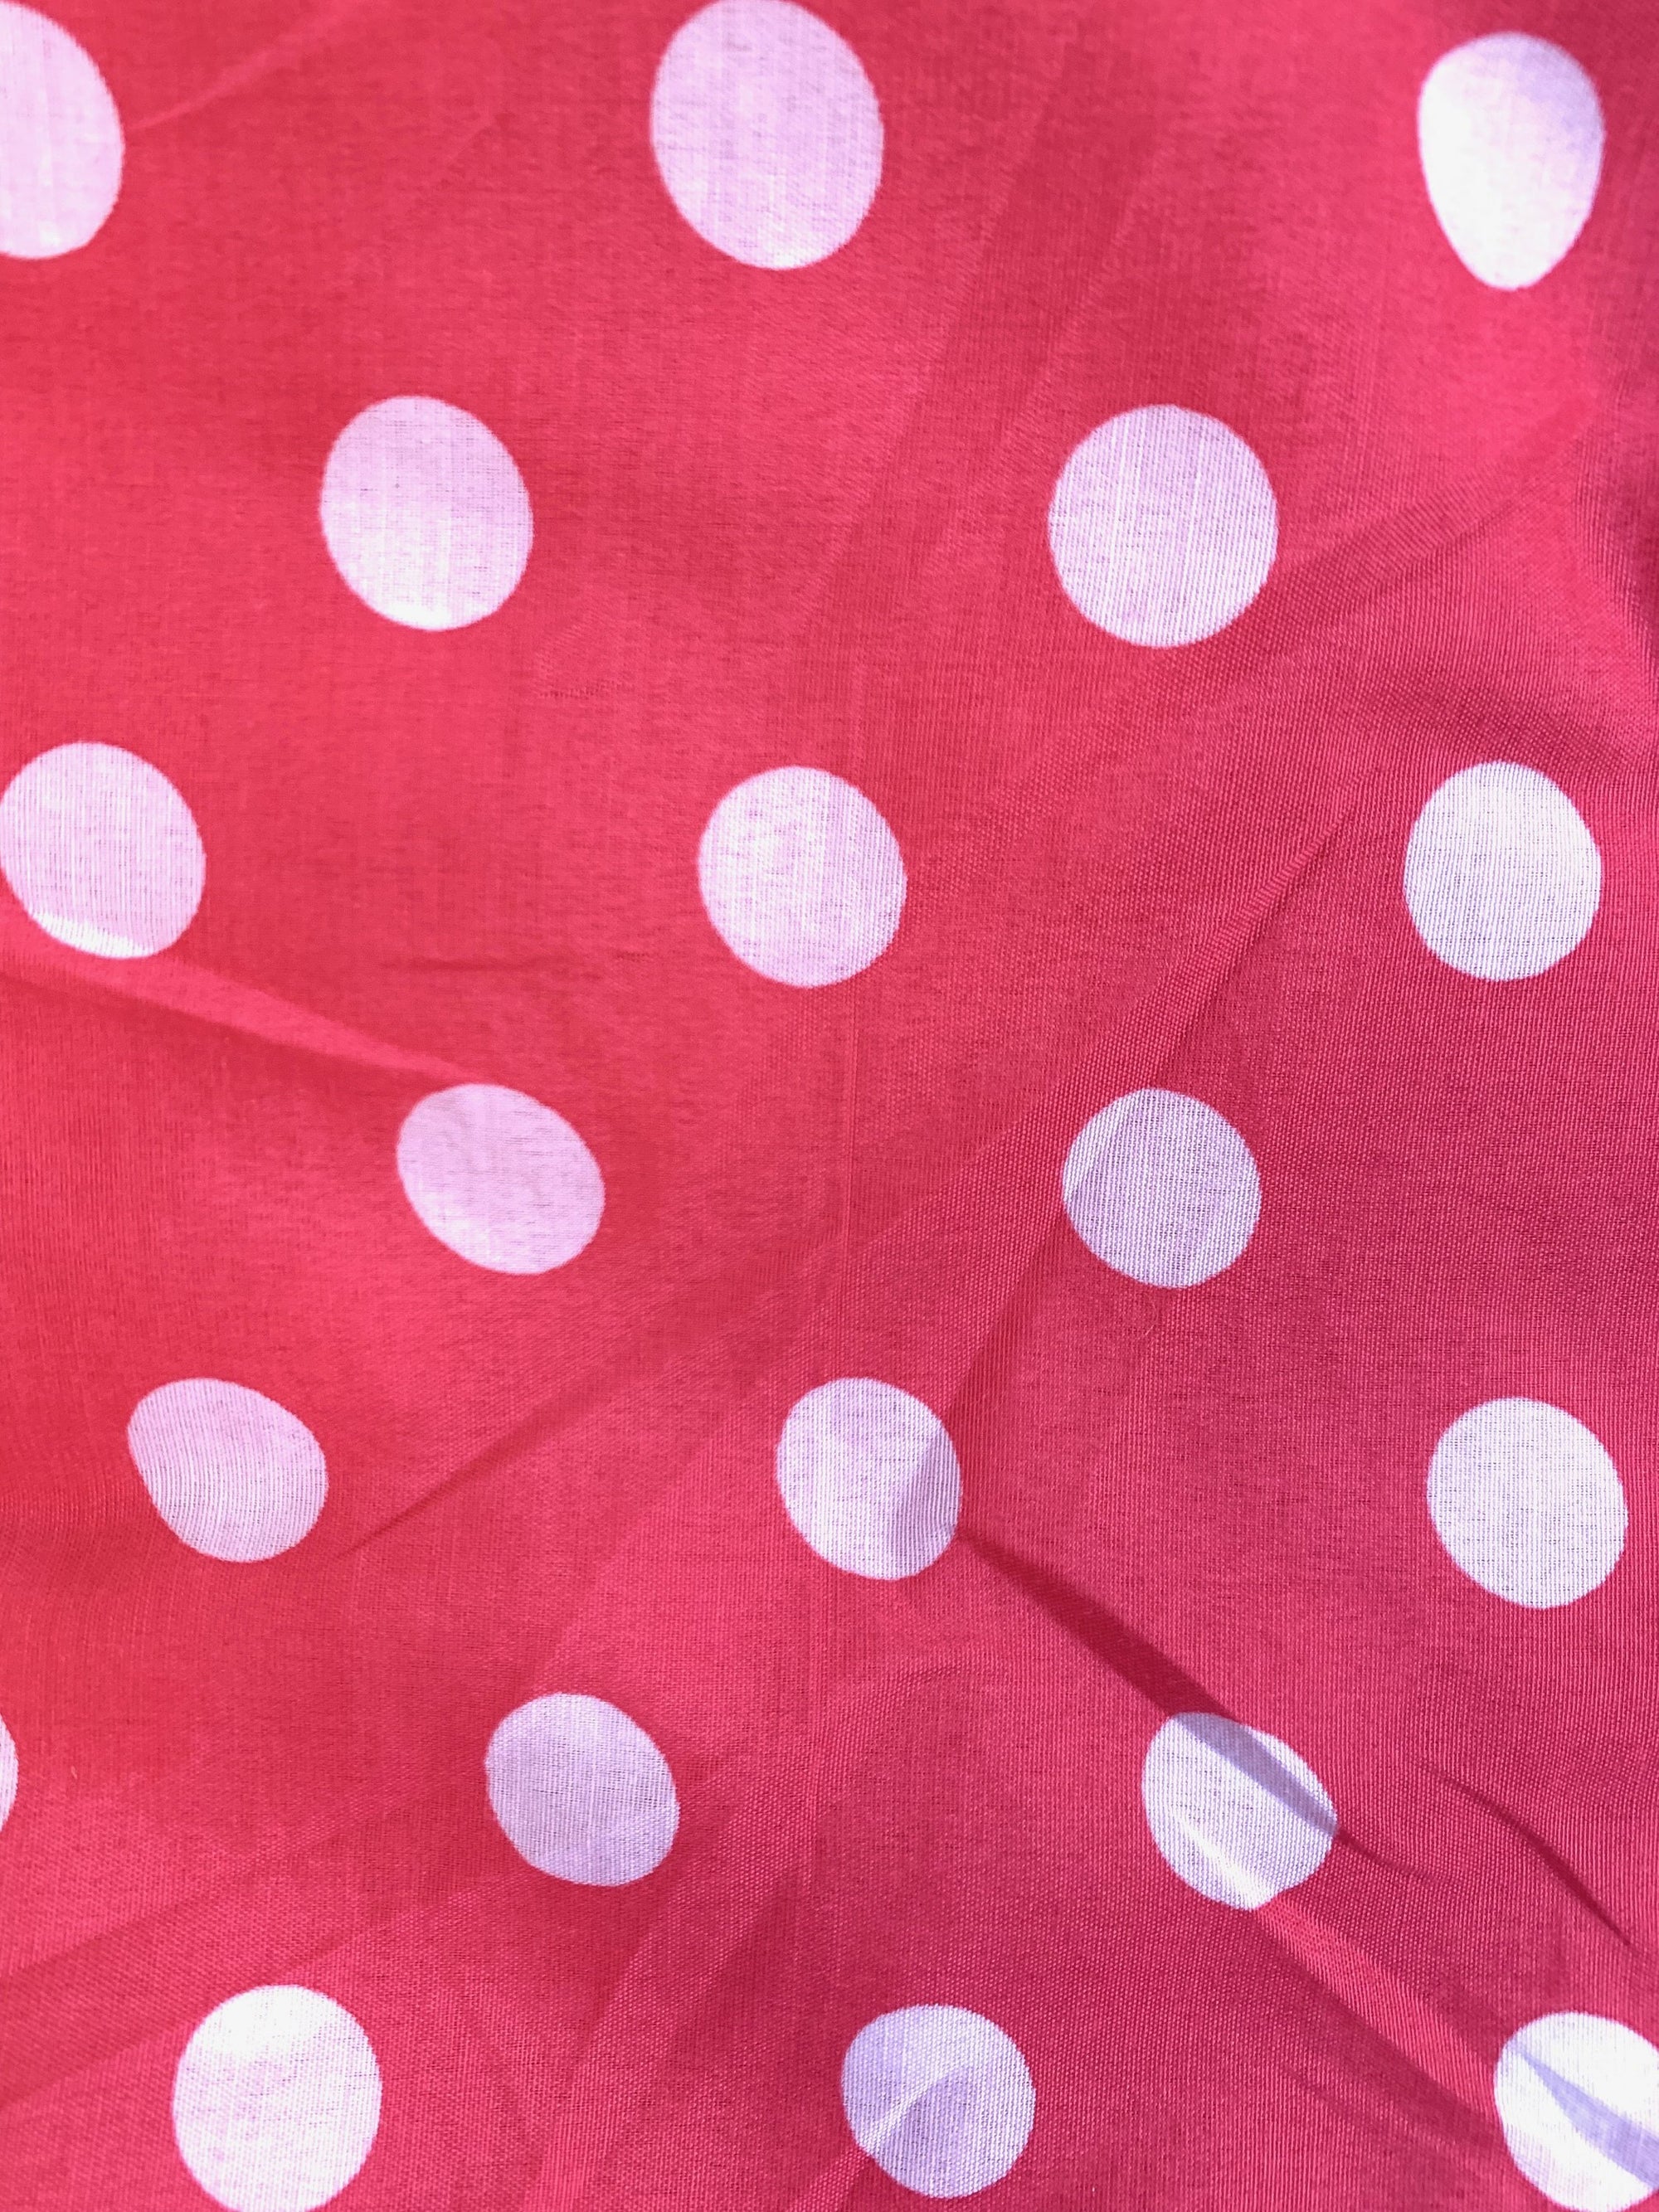 Alicia WHITE Polka Dots on PINK Polyester Cotton Fabric by the Yard - 10099